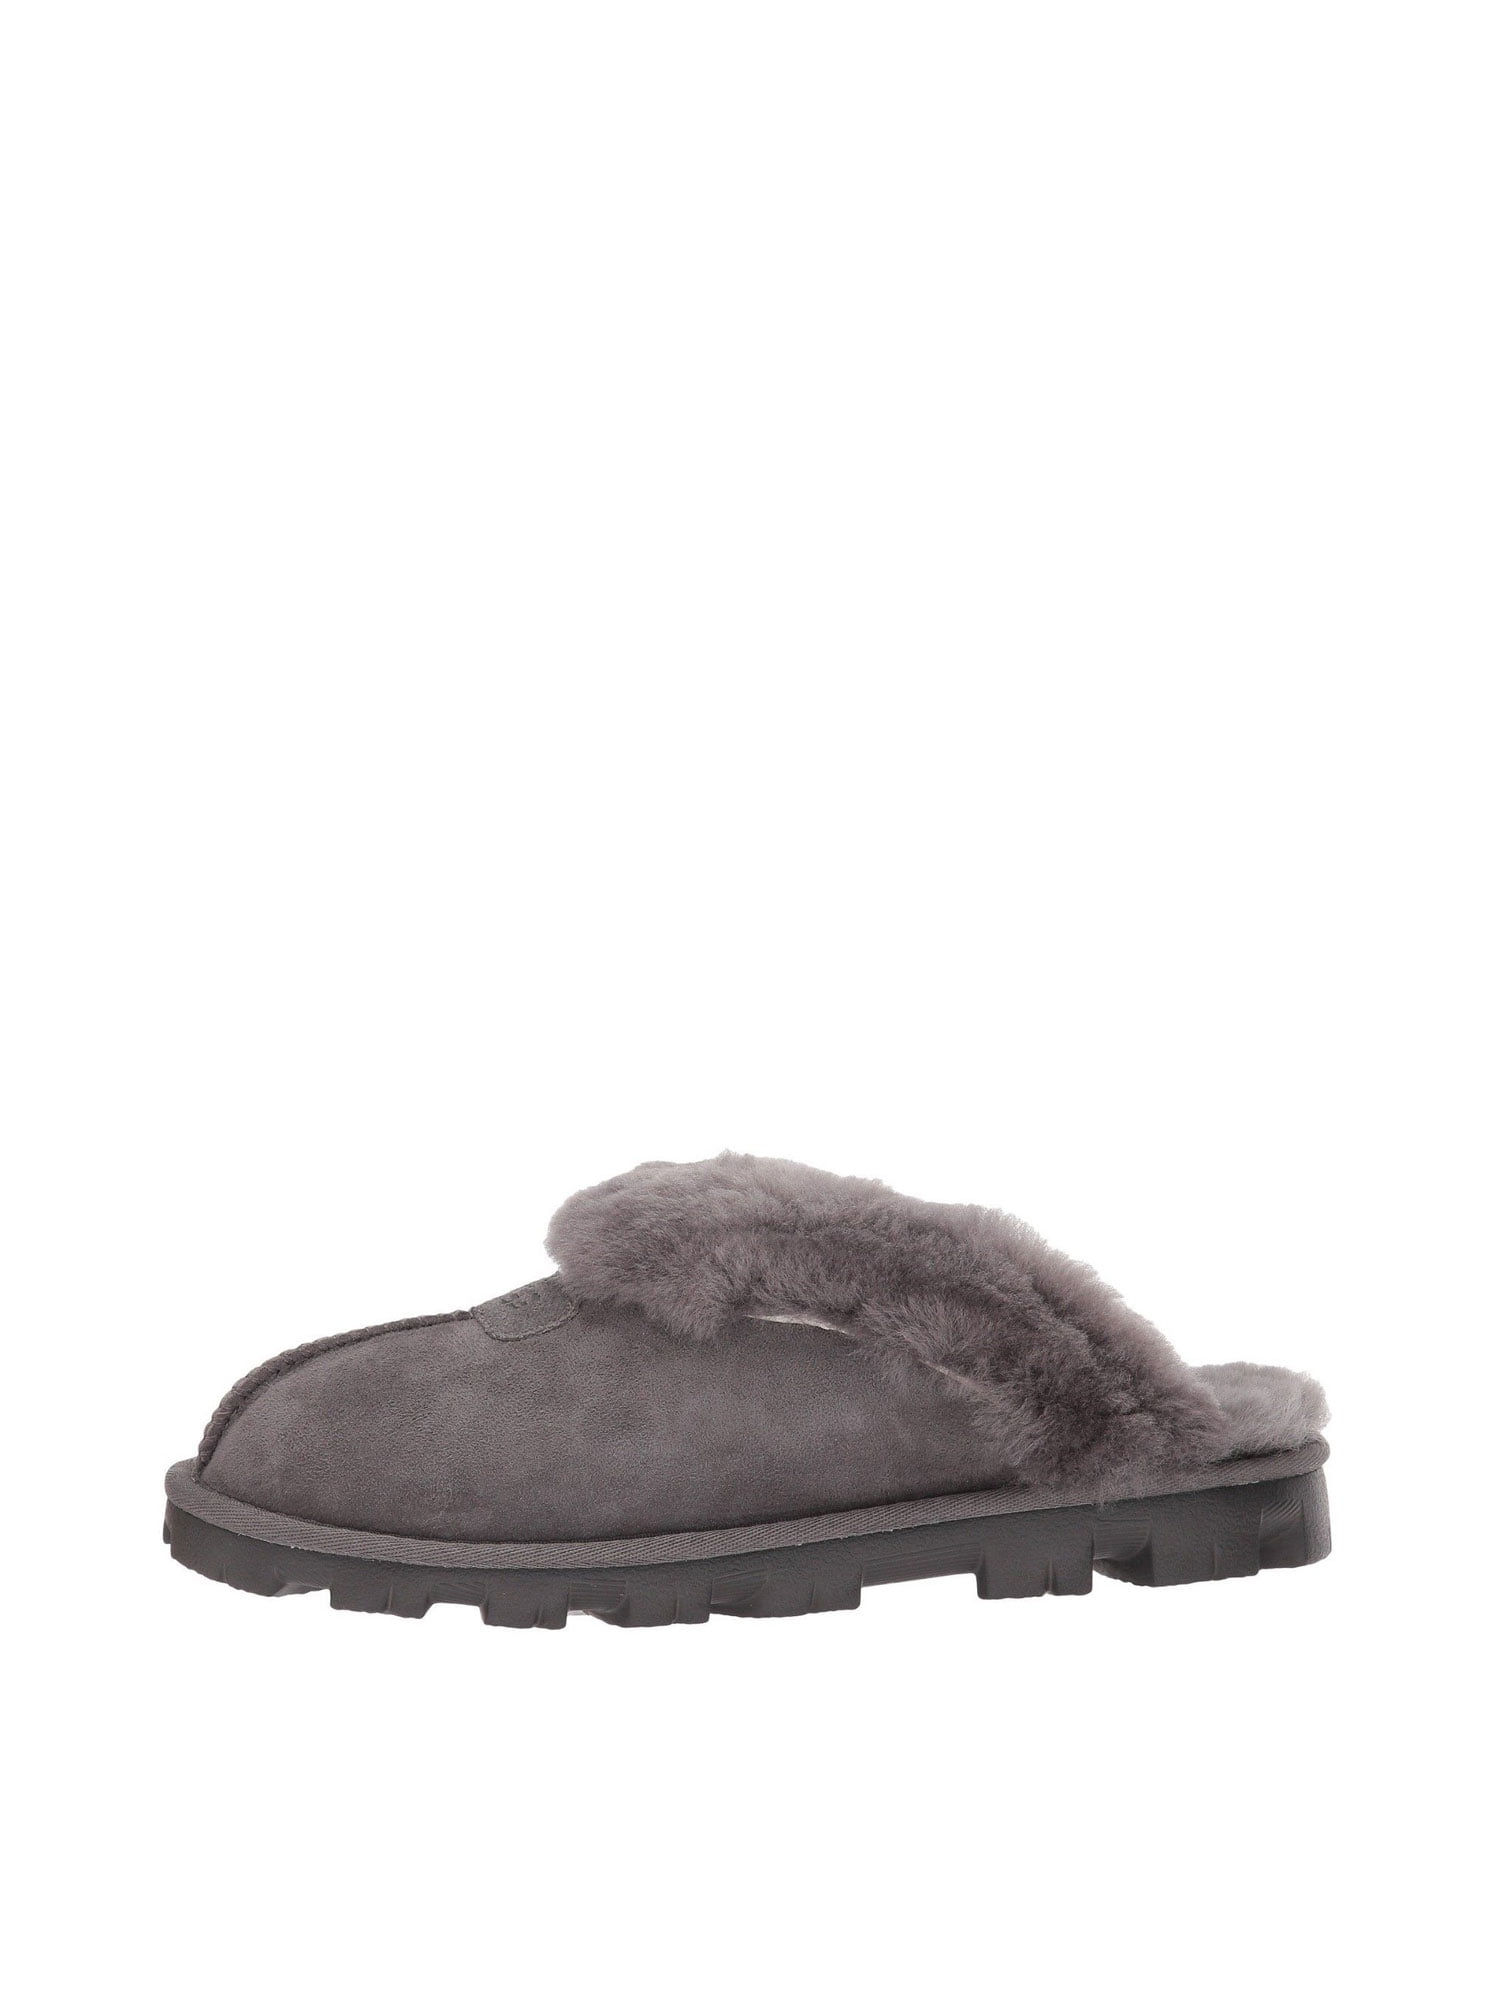 ugg women's coquette slippers sale